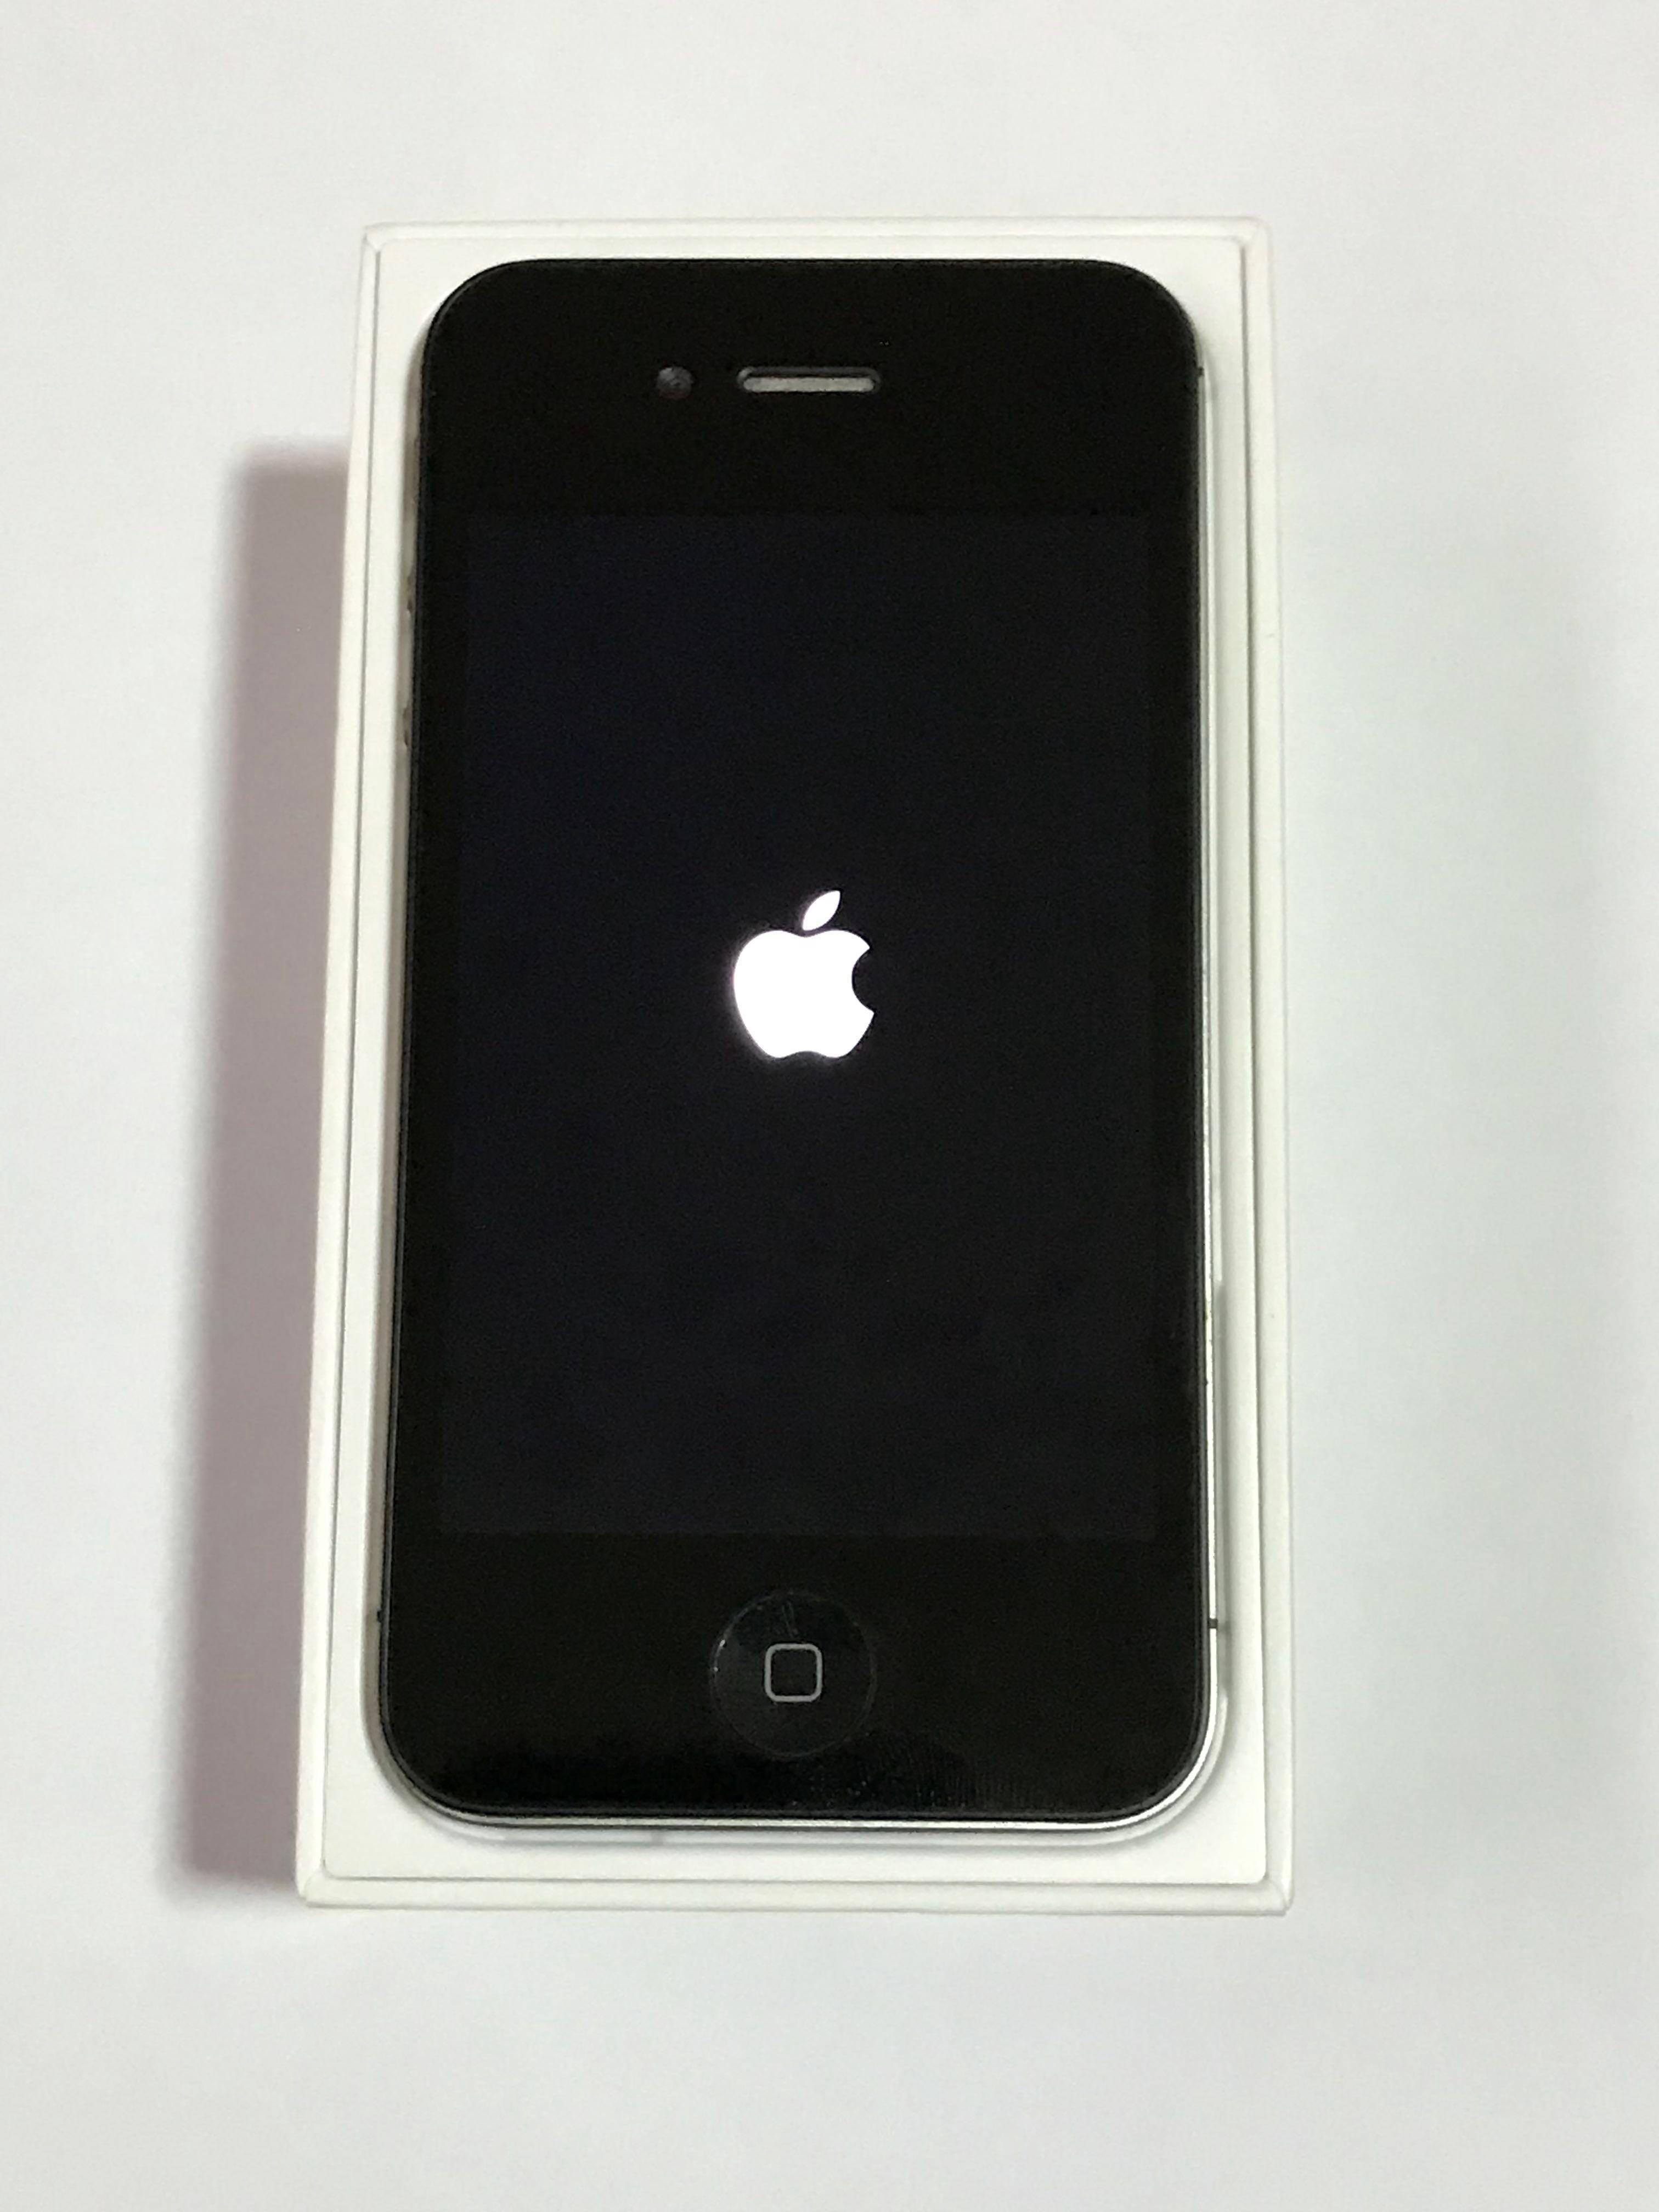 Iphone 4s Black 32gb Mobile Phones Gadgets Mobile Phones Iphone Iphone Others On Carousell